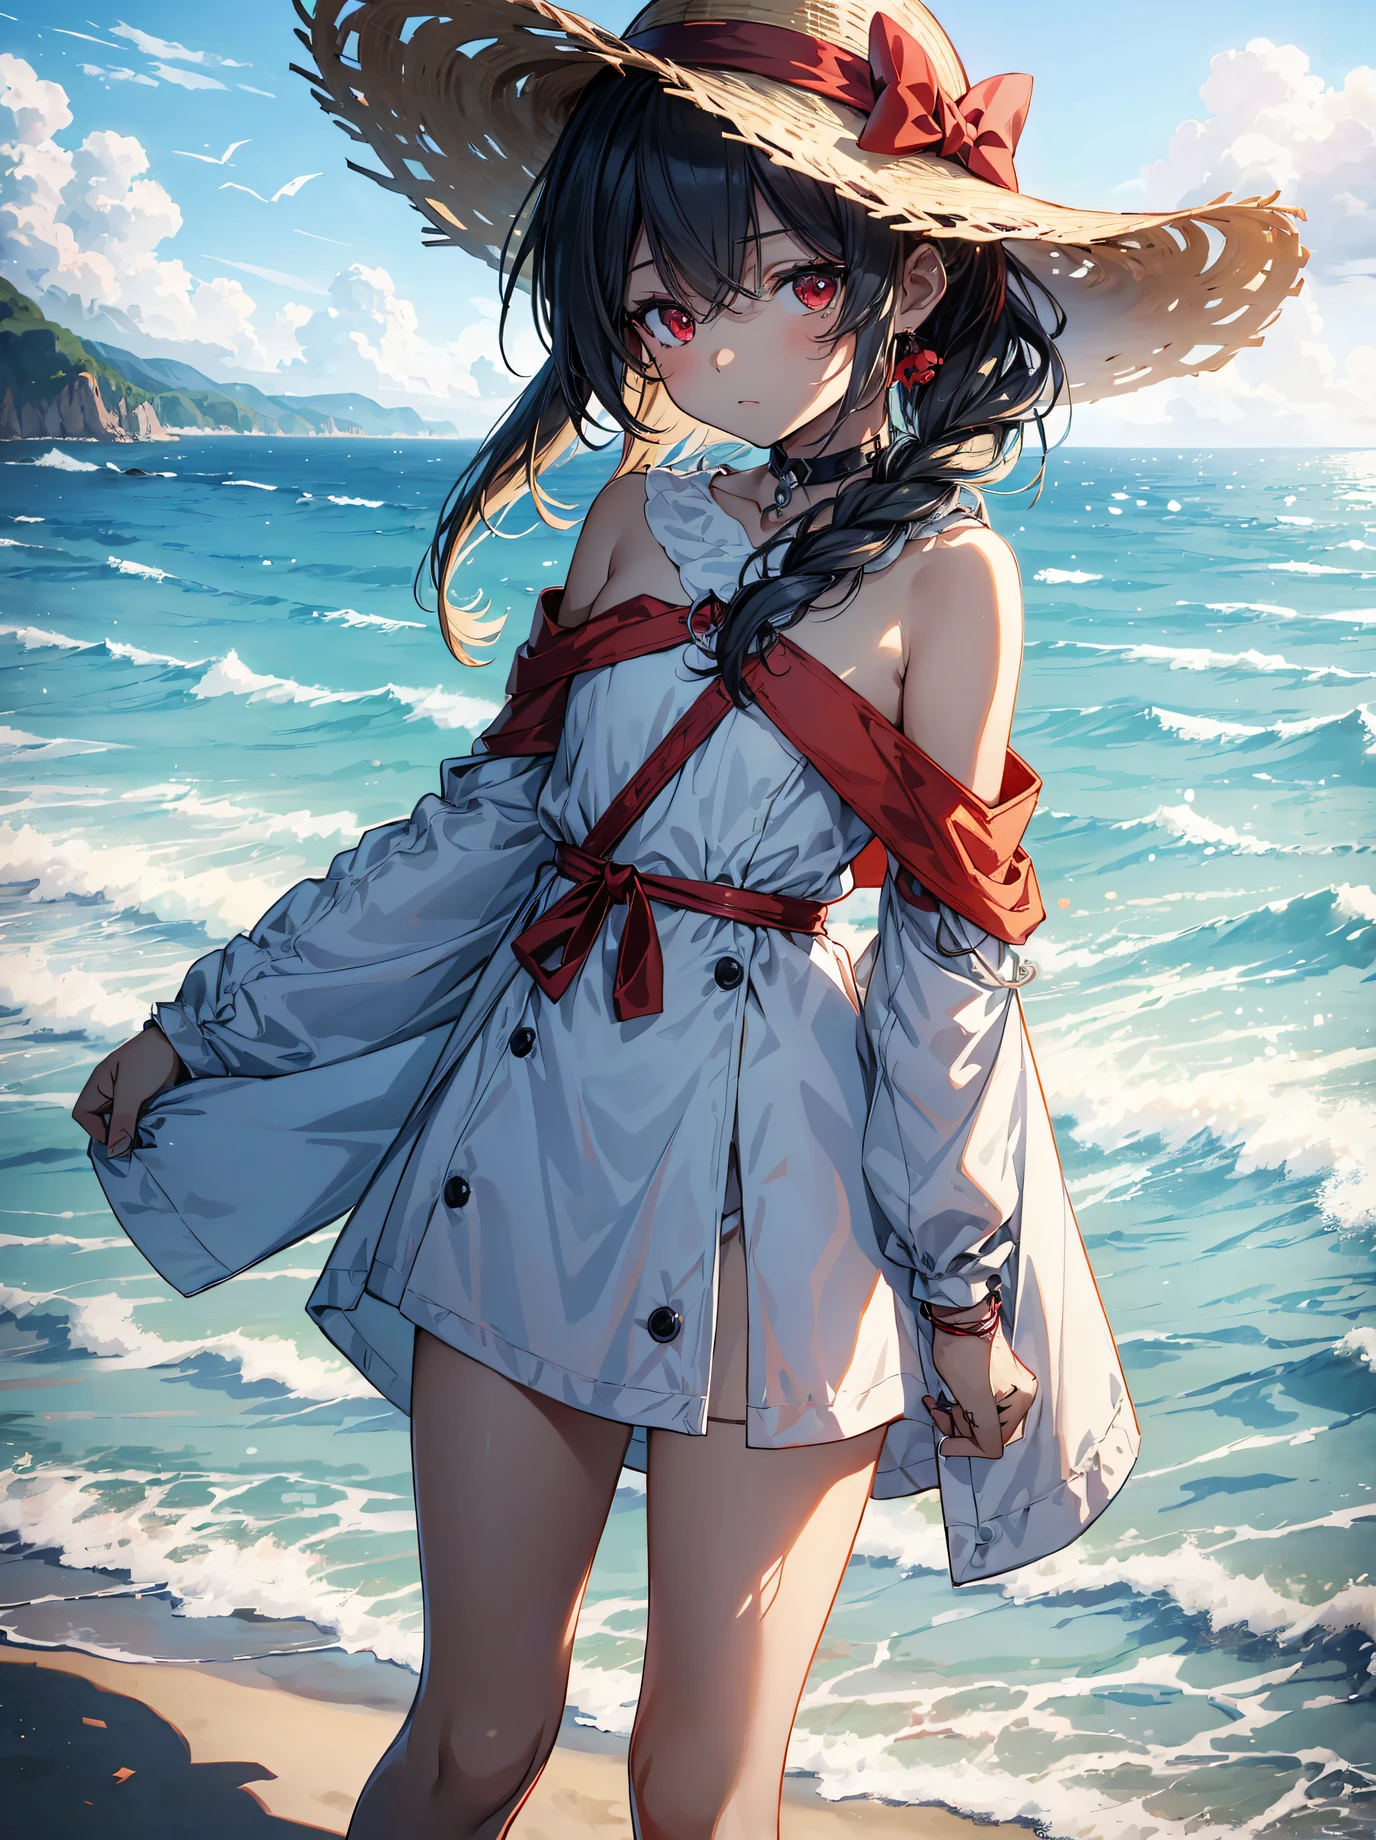 God quality,  anime moe artstyle,best anime 8k konachan wallpaper,badass anime 16k,perfect anatomy, (Please draw A girl in a off shoulder dress walking on the beach. :1.3),break, 1girl, (Solo,,,12-year-old:1.5),(dark tan skin), Full limbs, complete fingers, long hair, silver hair,  androgynous charm,flat chest, Small butt, groin, Small eyes,beatiful detailed red eyes,Ponytail, anklet, sun hat, in the rural beach. break,ultra-detailed,high resolution,super detailed skin, professional lighting,(god illustration:1.2),